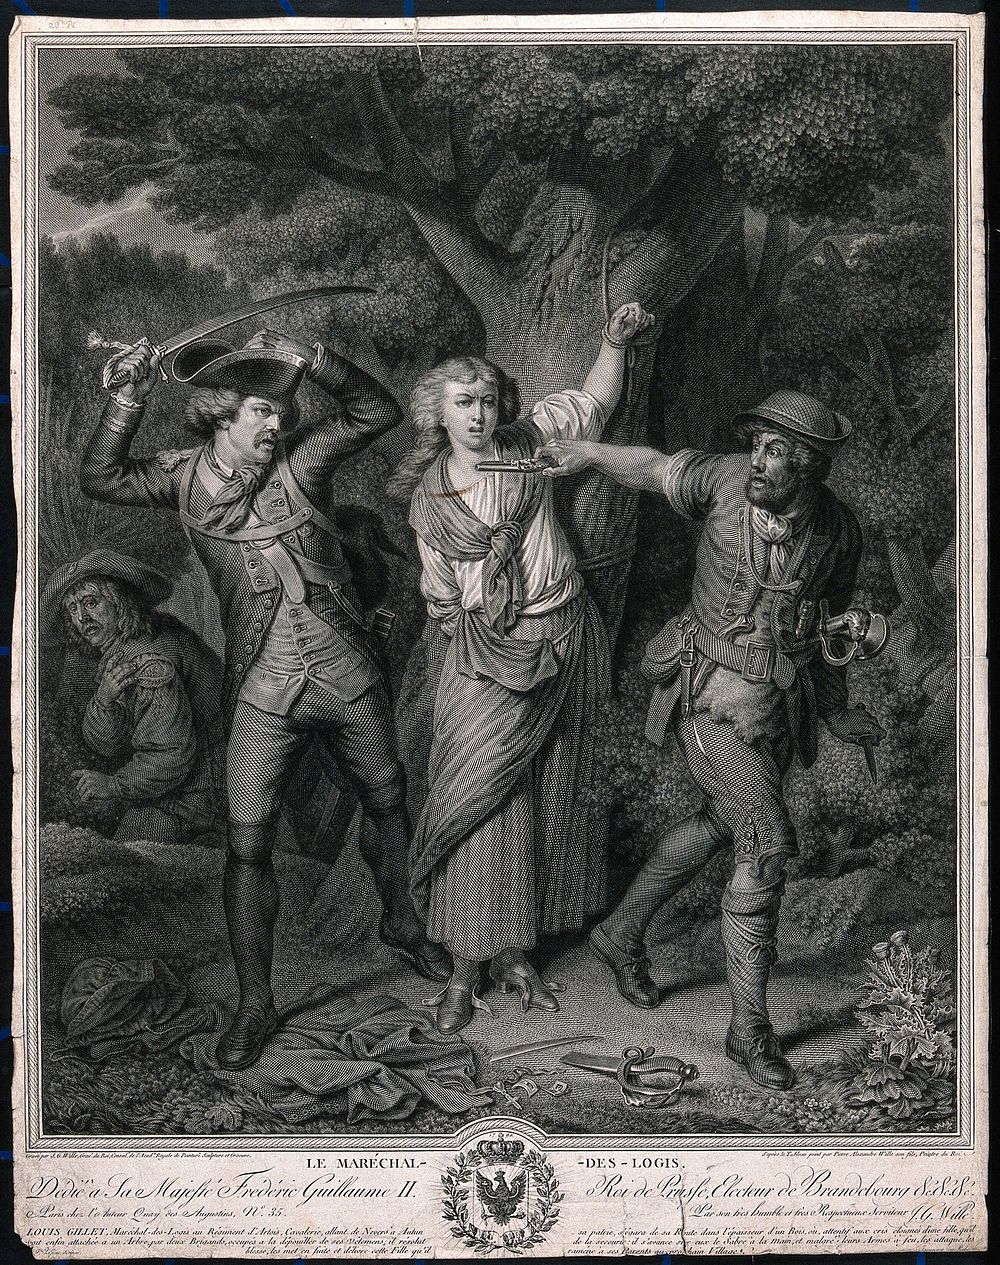 The sergeant Louis Gillet discovers a woman who had been tied to a tree by brigands and fights with the brigands to free…